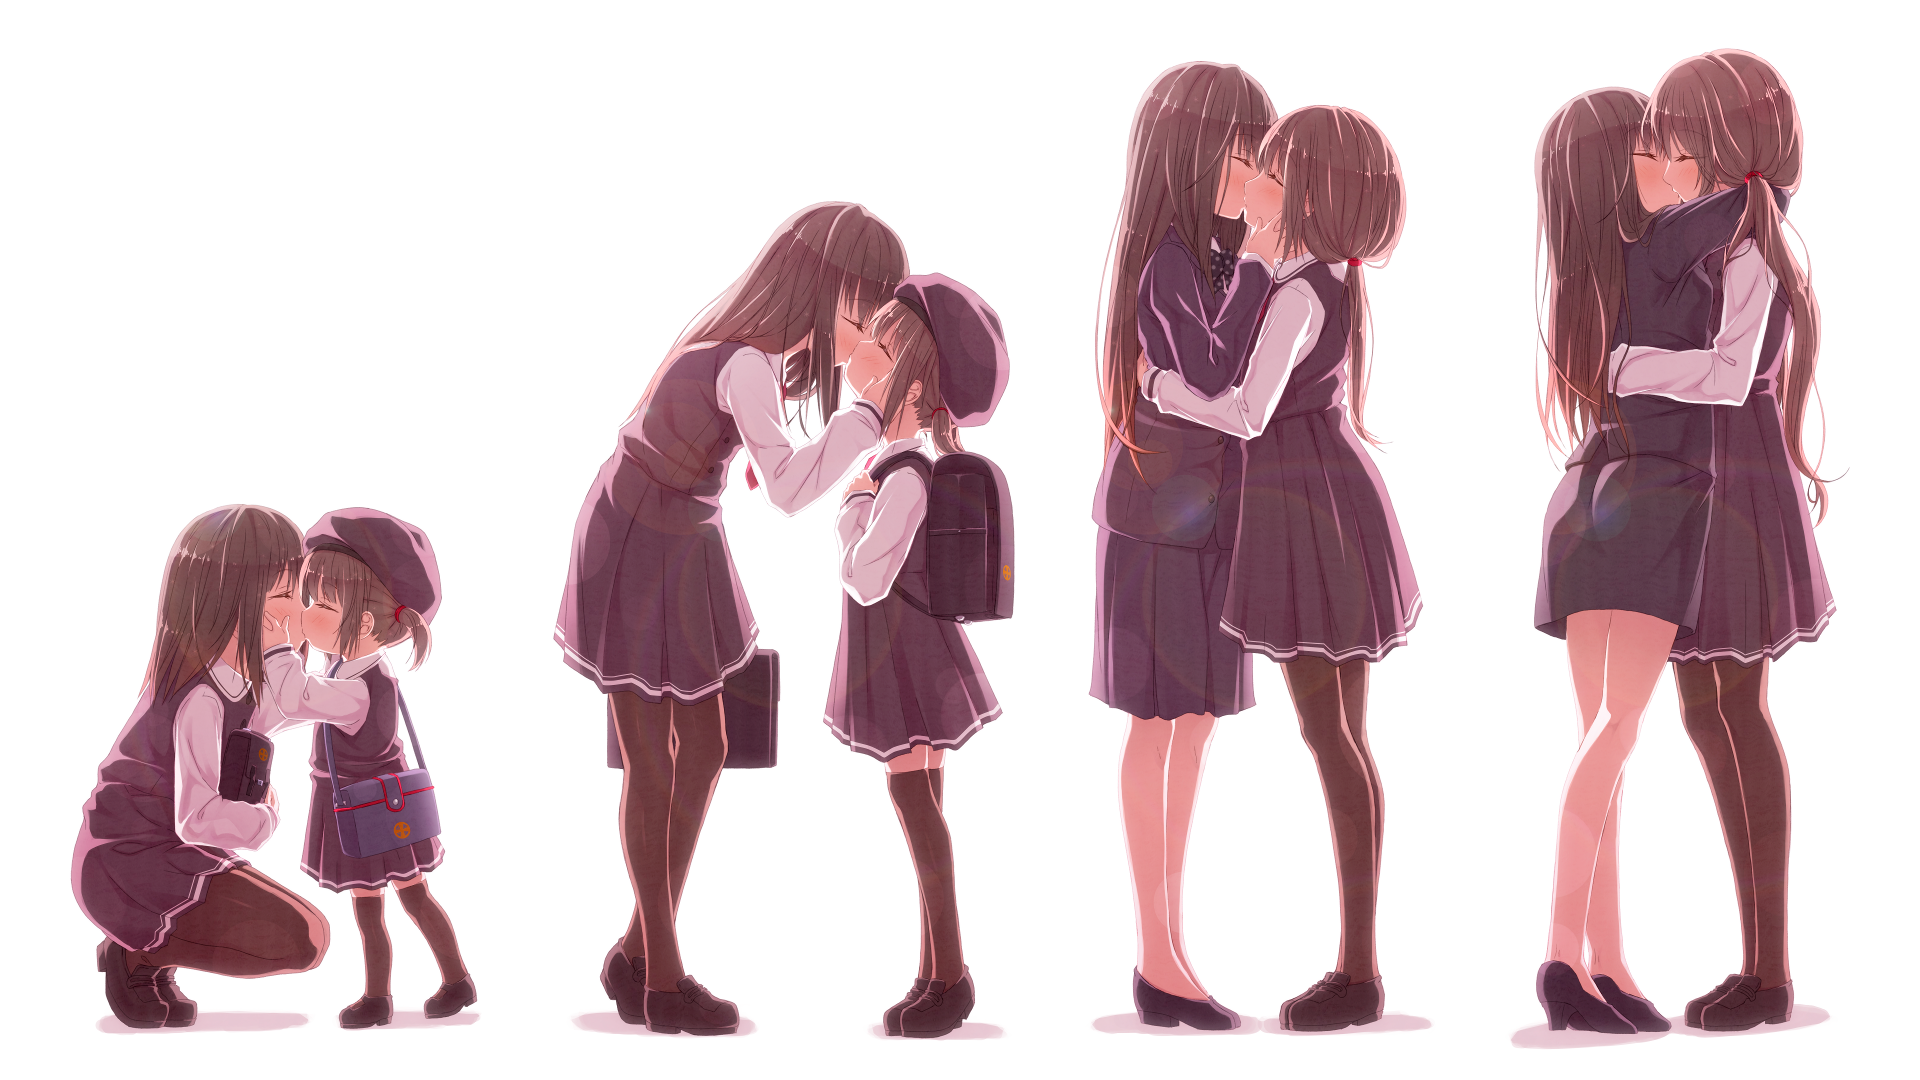 Age difference yuri kissing, growing up [Original]